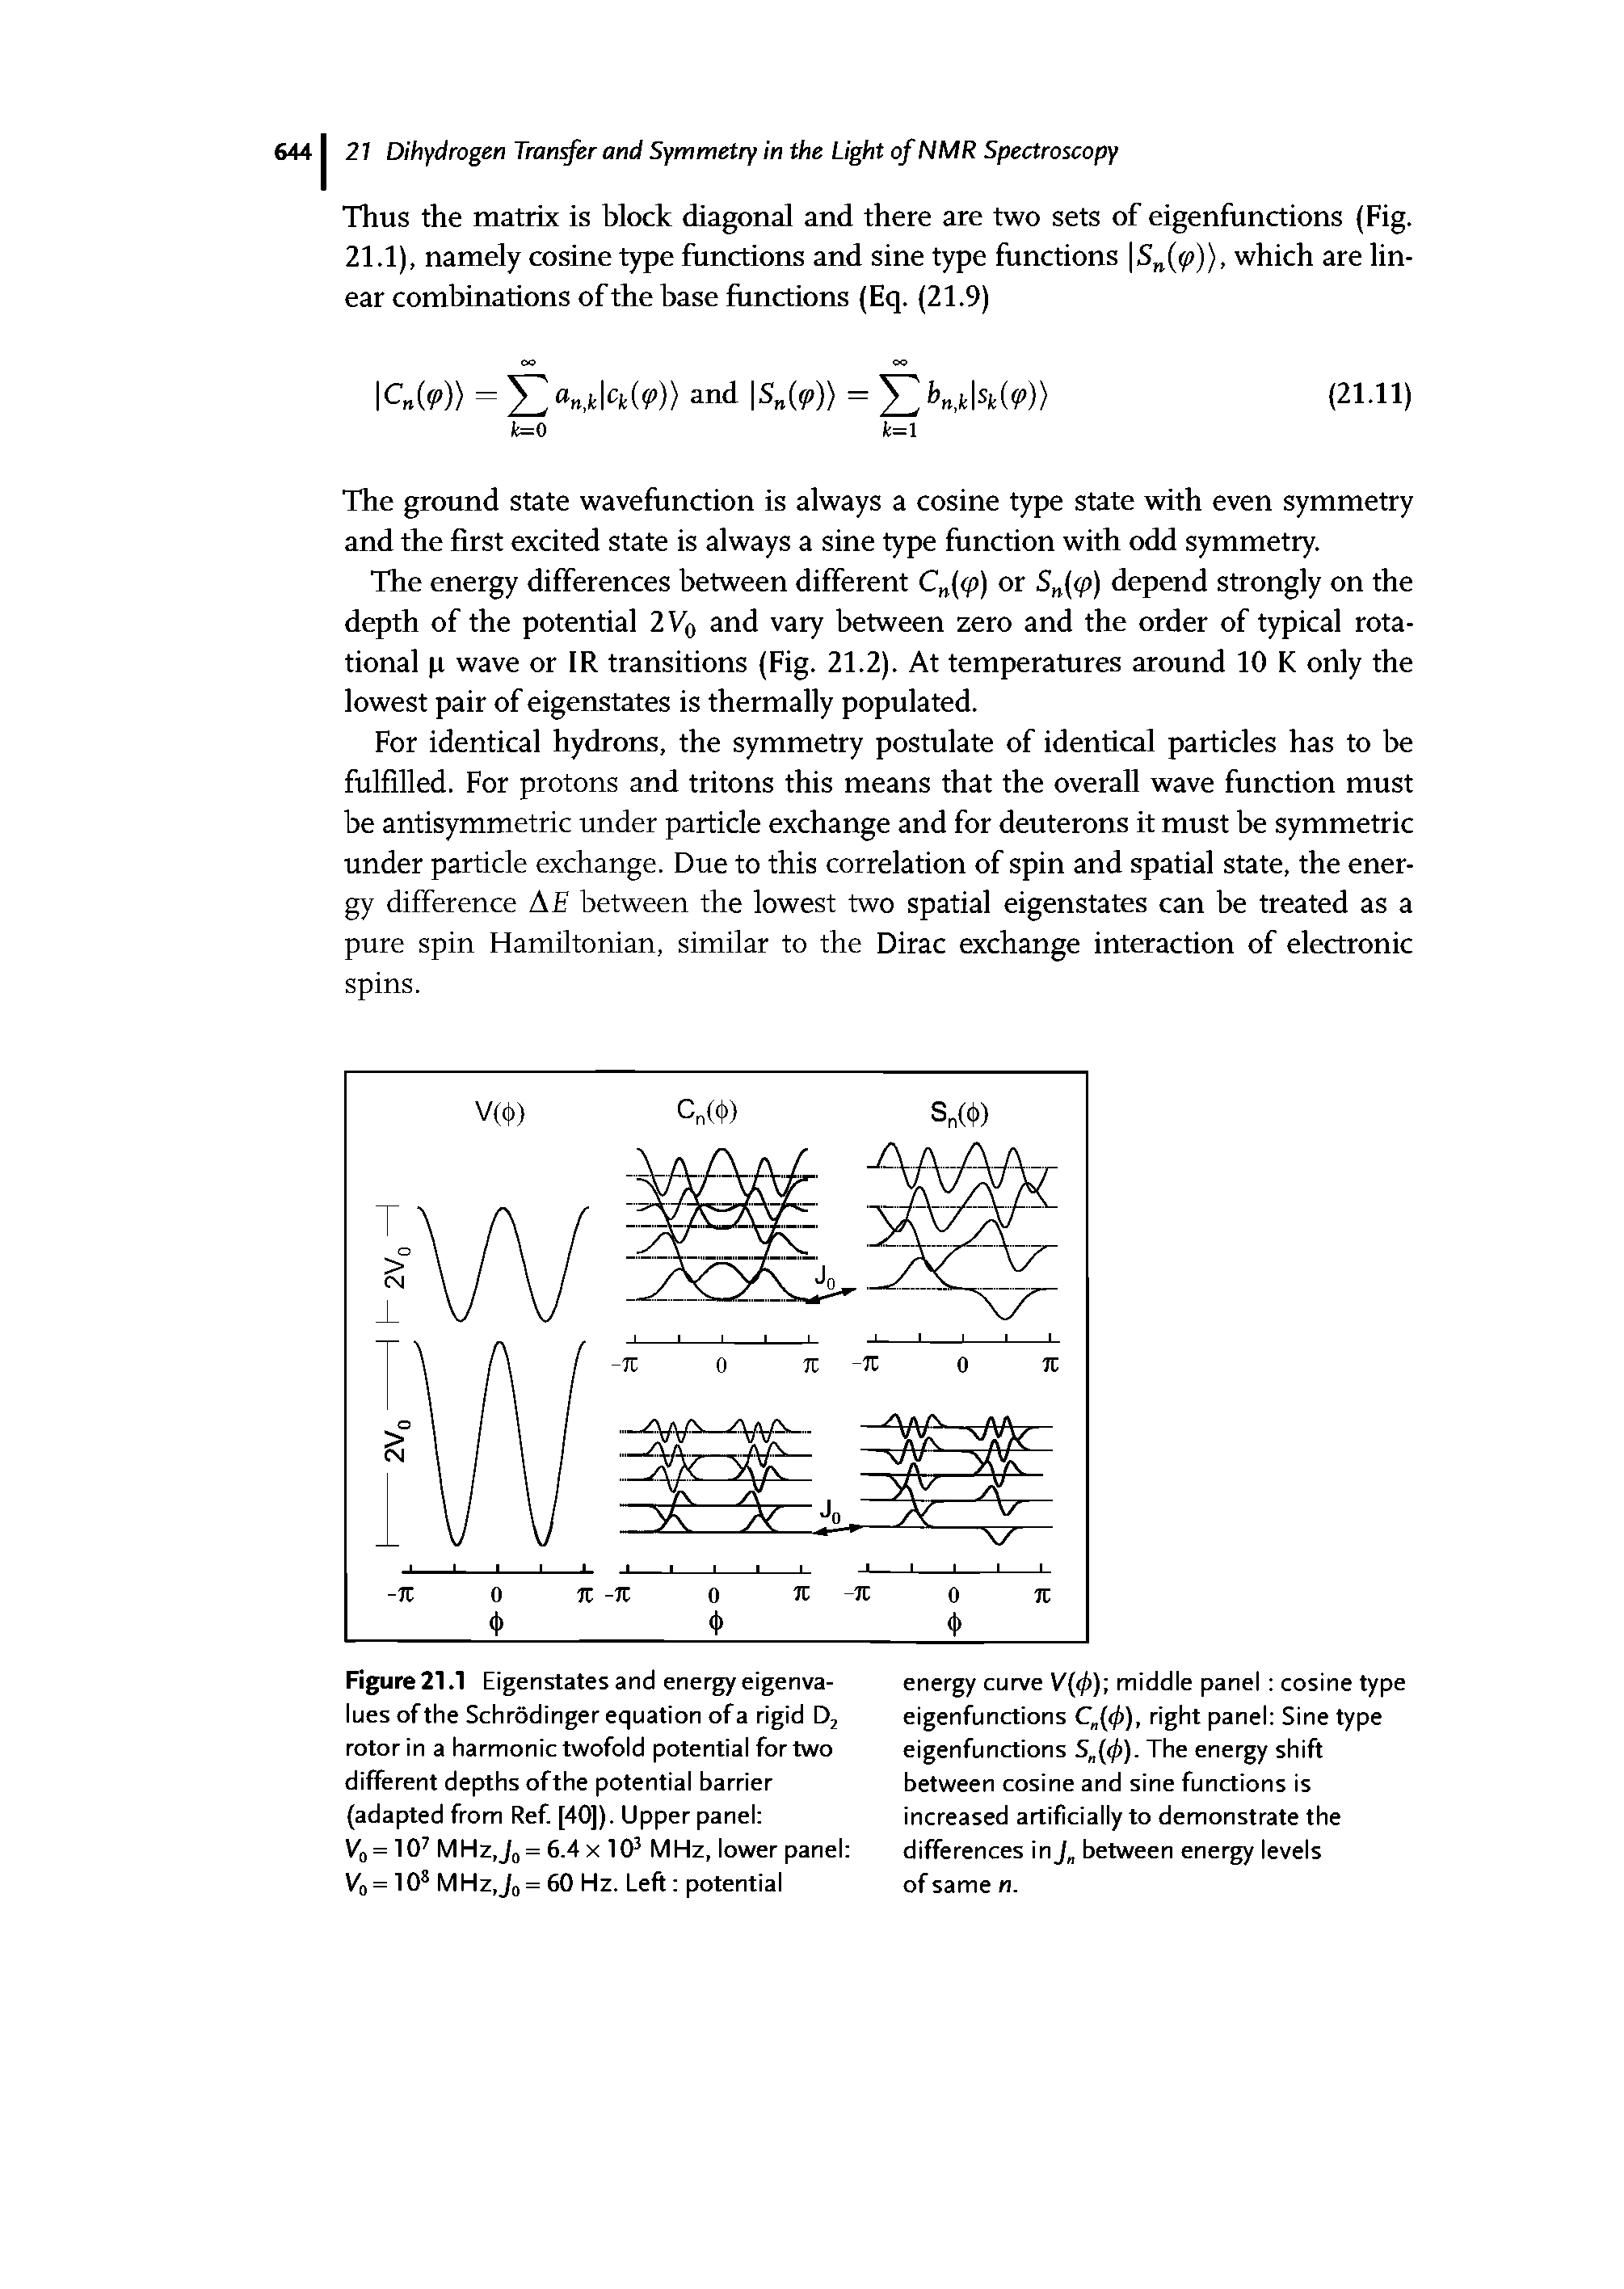 Figure 21.1 Eigenstates and energy eigenvalues of the Schrodinger equation of a rigid Dj rotor in a harmonic twofold potential for two different depths of the potential barrier (adapted from Ref [40]). Upper panel ...